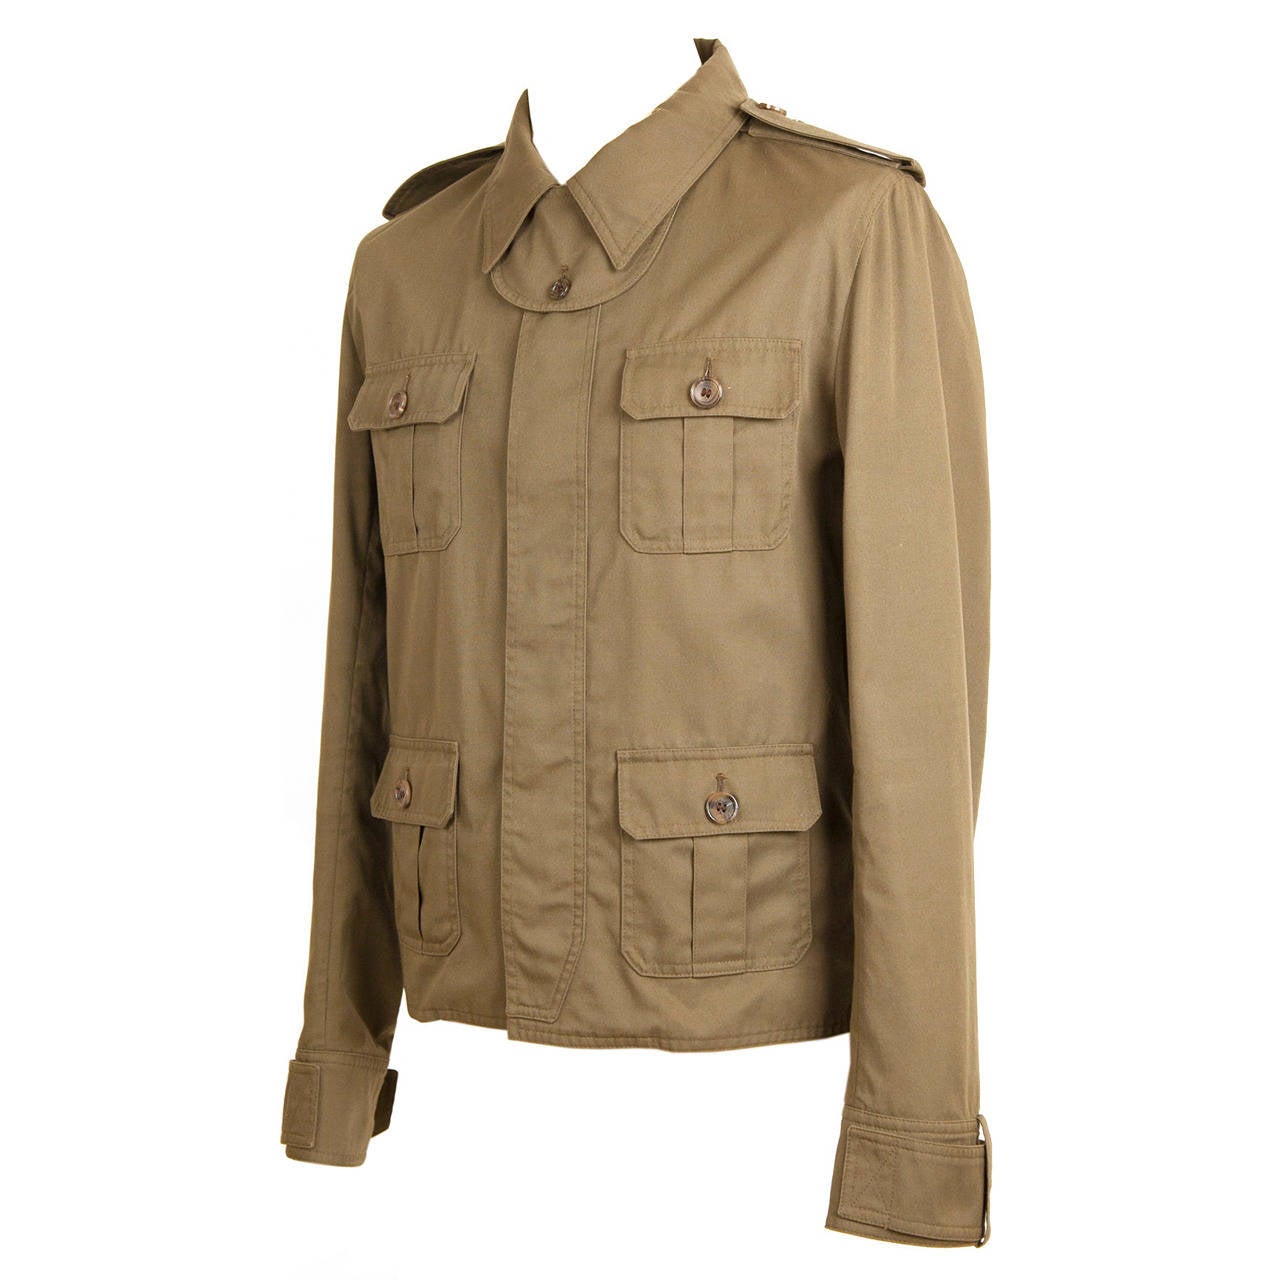 Dior Homme by Hedi Slimane khaki safari jacket from SS07